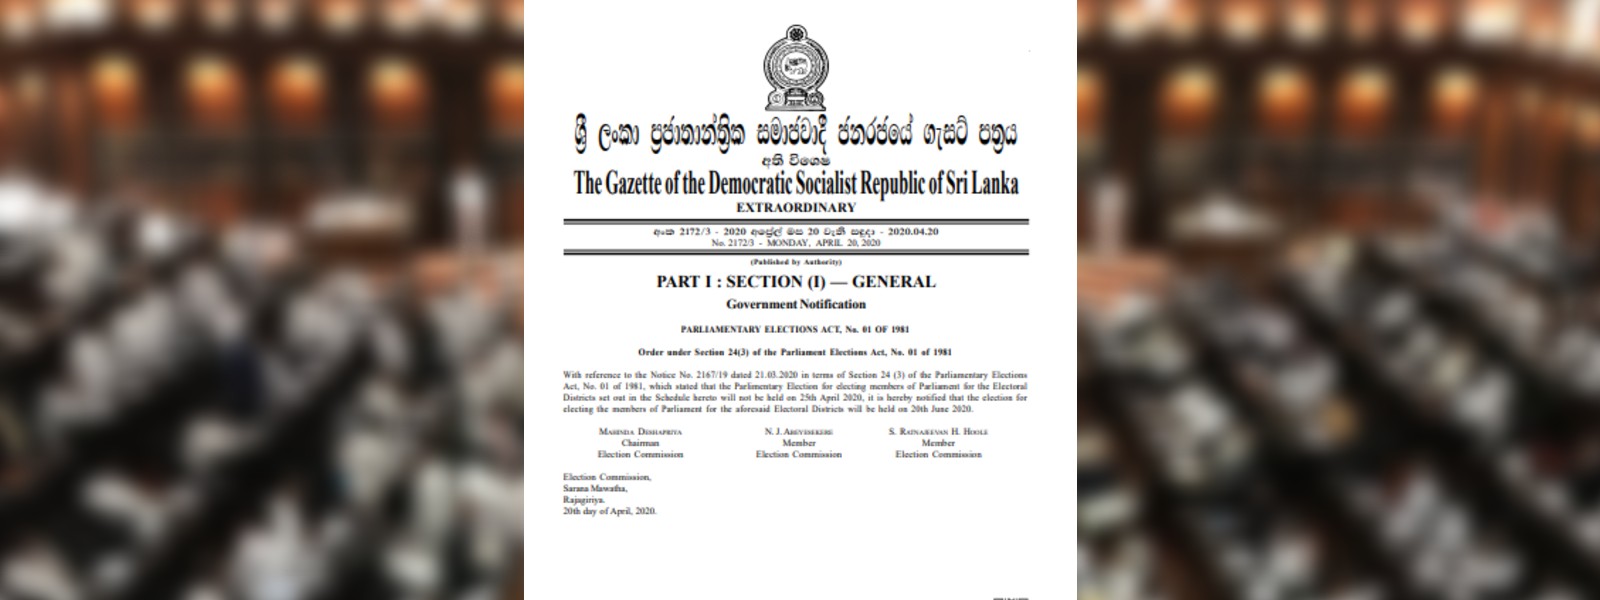 Extraordinary Gazette declaring the General Election has been issued